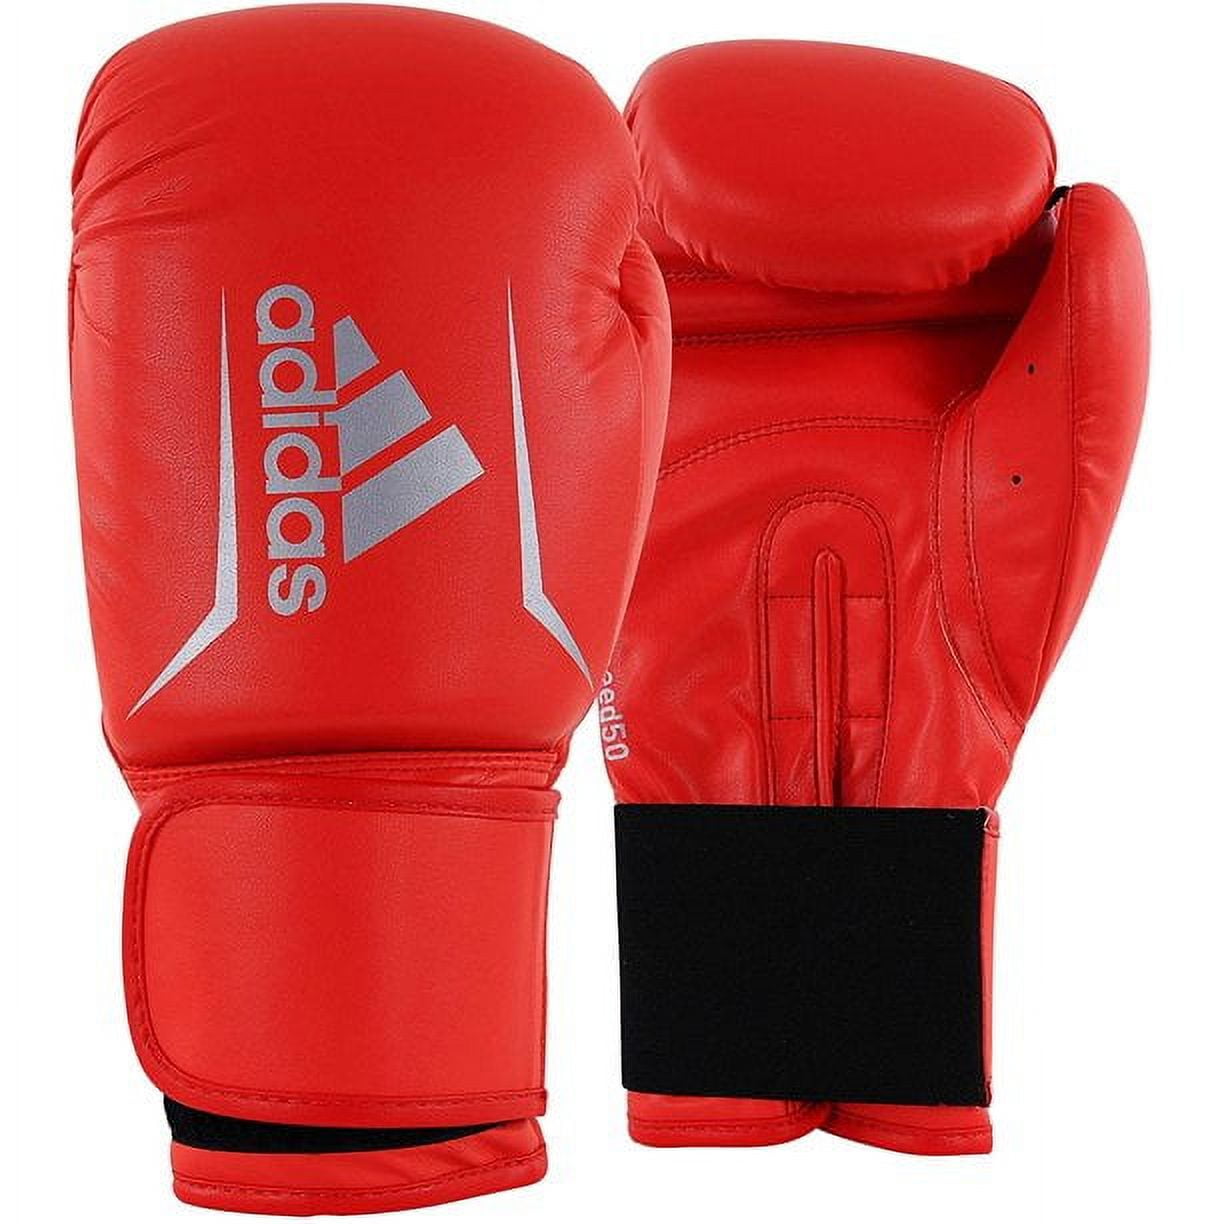 and Speed Bags. Solar Sparring, Heavy Punching, & 12oz Red, FLX Boxing 3.0 Gym, Gloves for Training, Kickboxing Fitness 50 and Women adidas Light for Men Silver